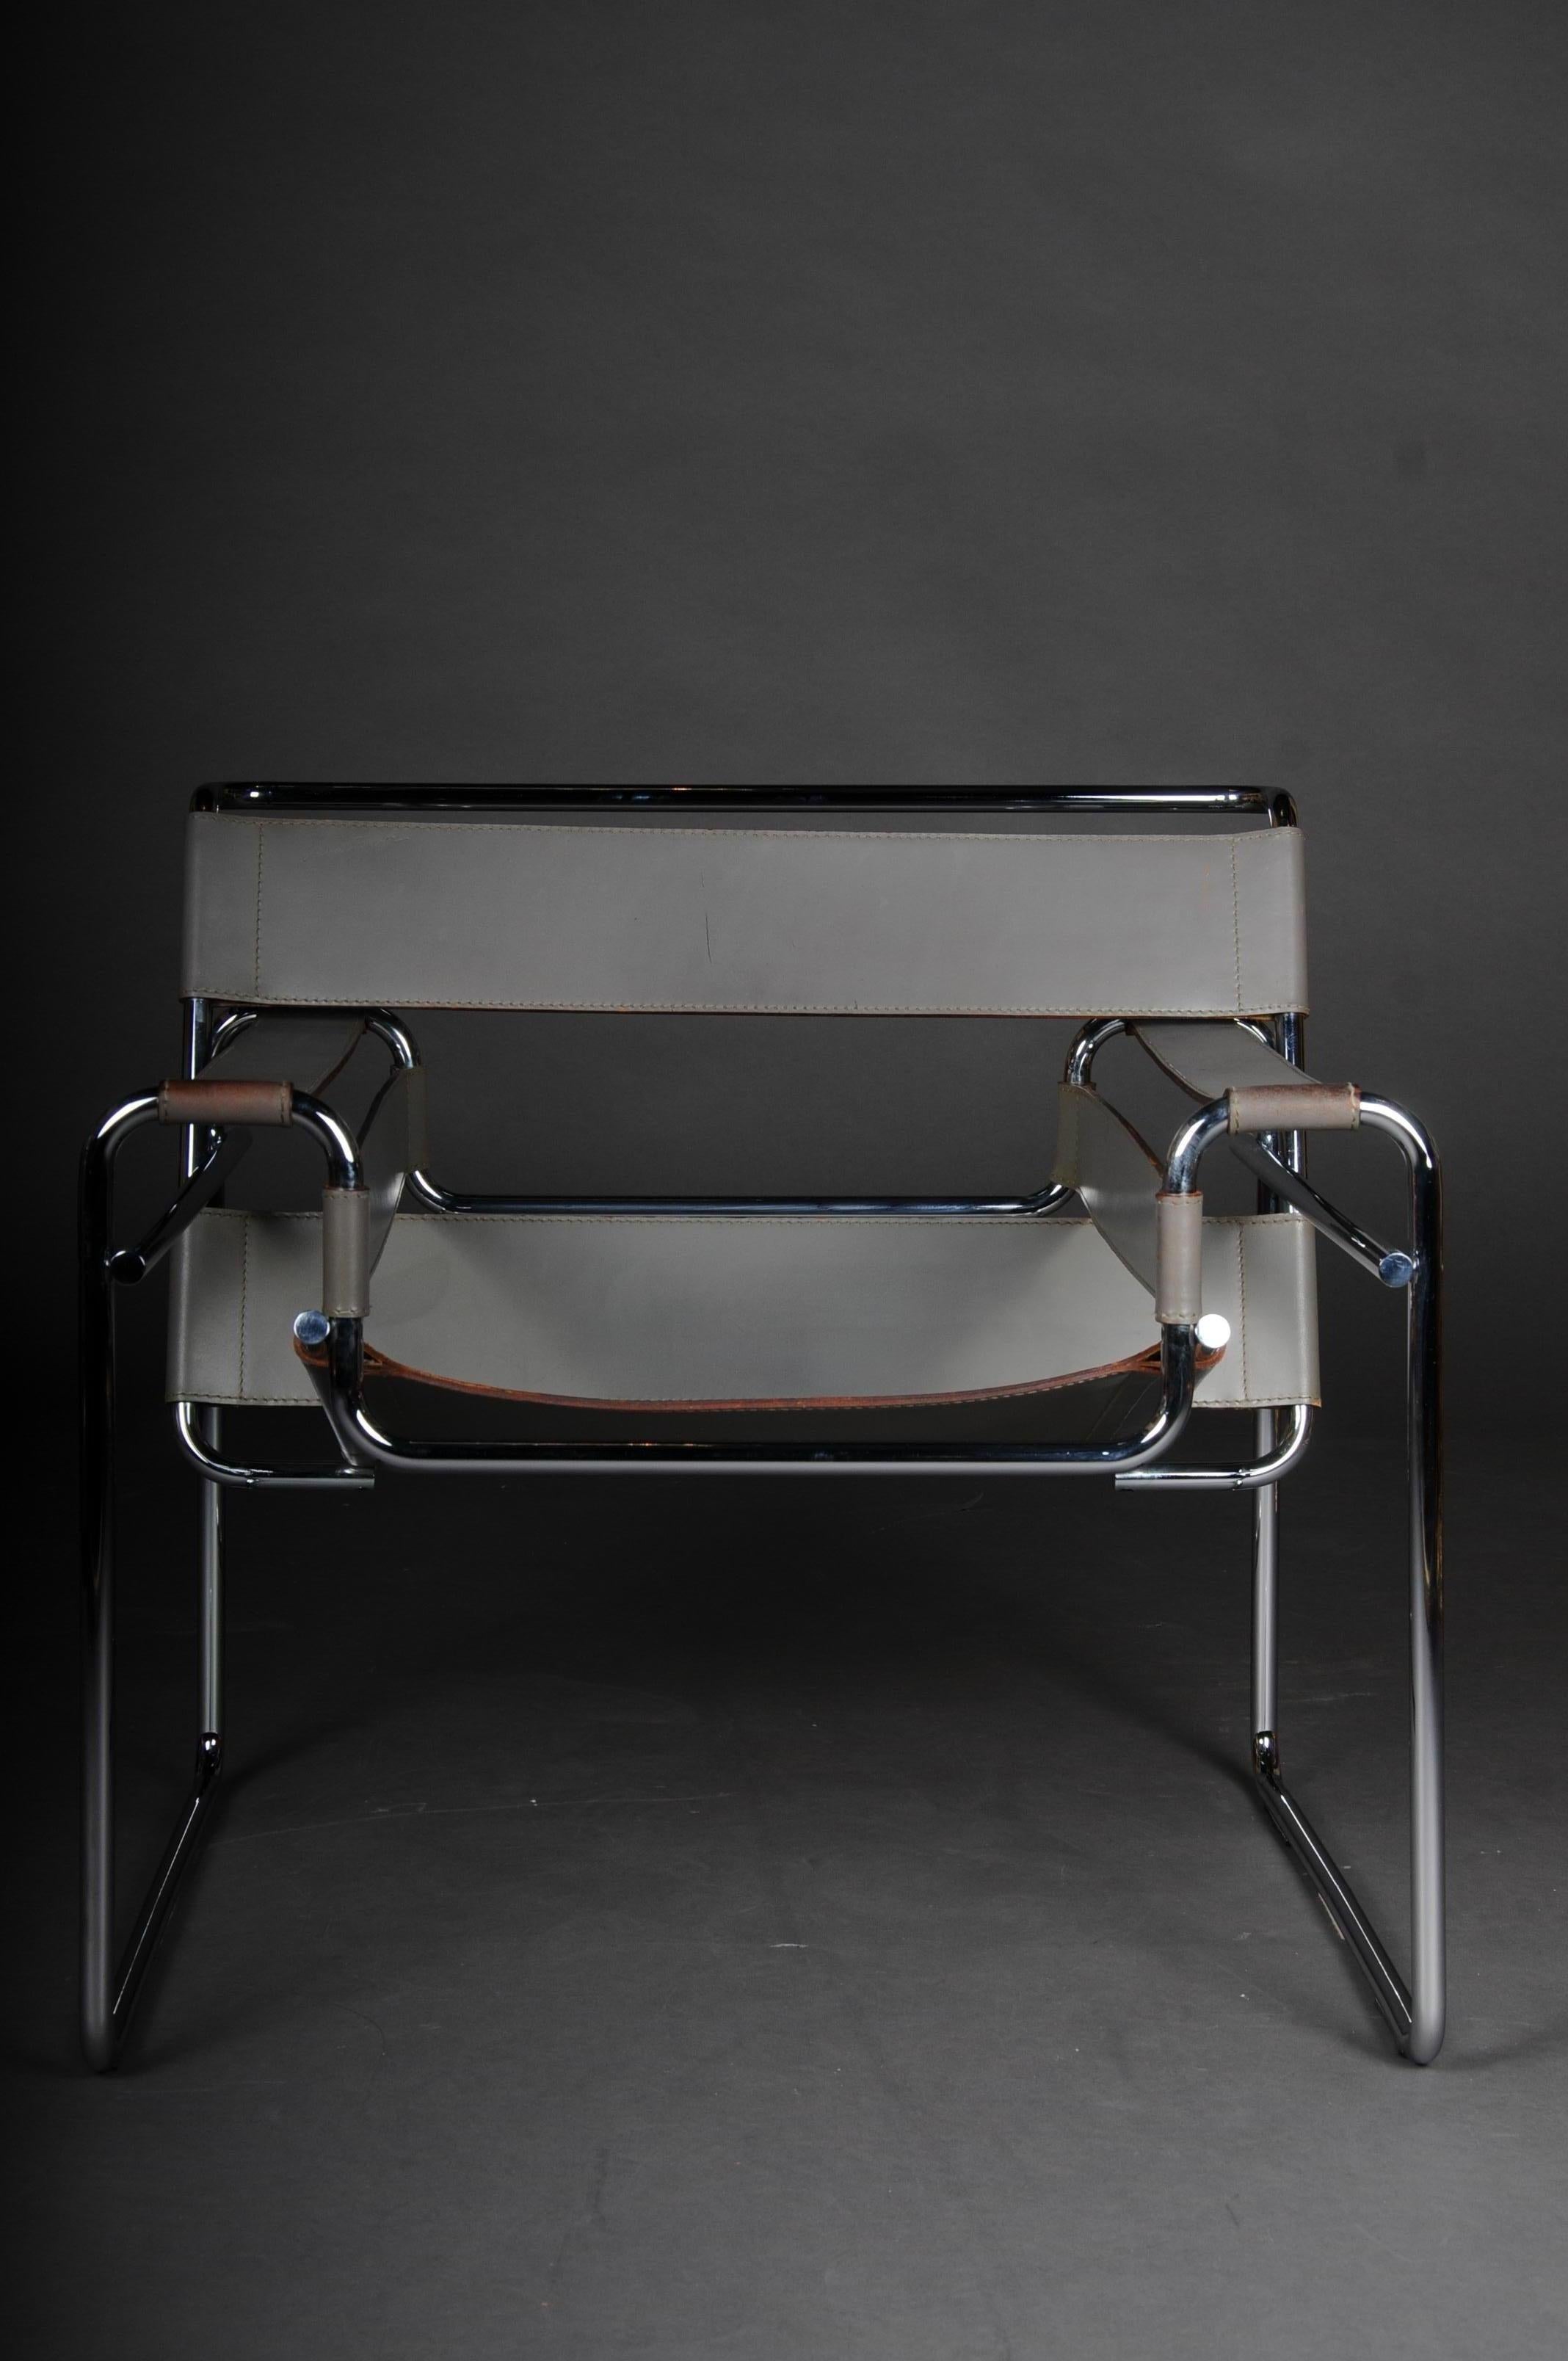 Designer armchair / chair Wassily Marcel Breuer / Knoll International

Vintage model gray cowhide leather, the Wassily armchair design from 1925 designed by Marcel Breuer at the Bauhaus and produced today by Knoll, marks the beginning of modern